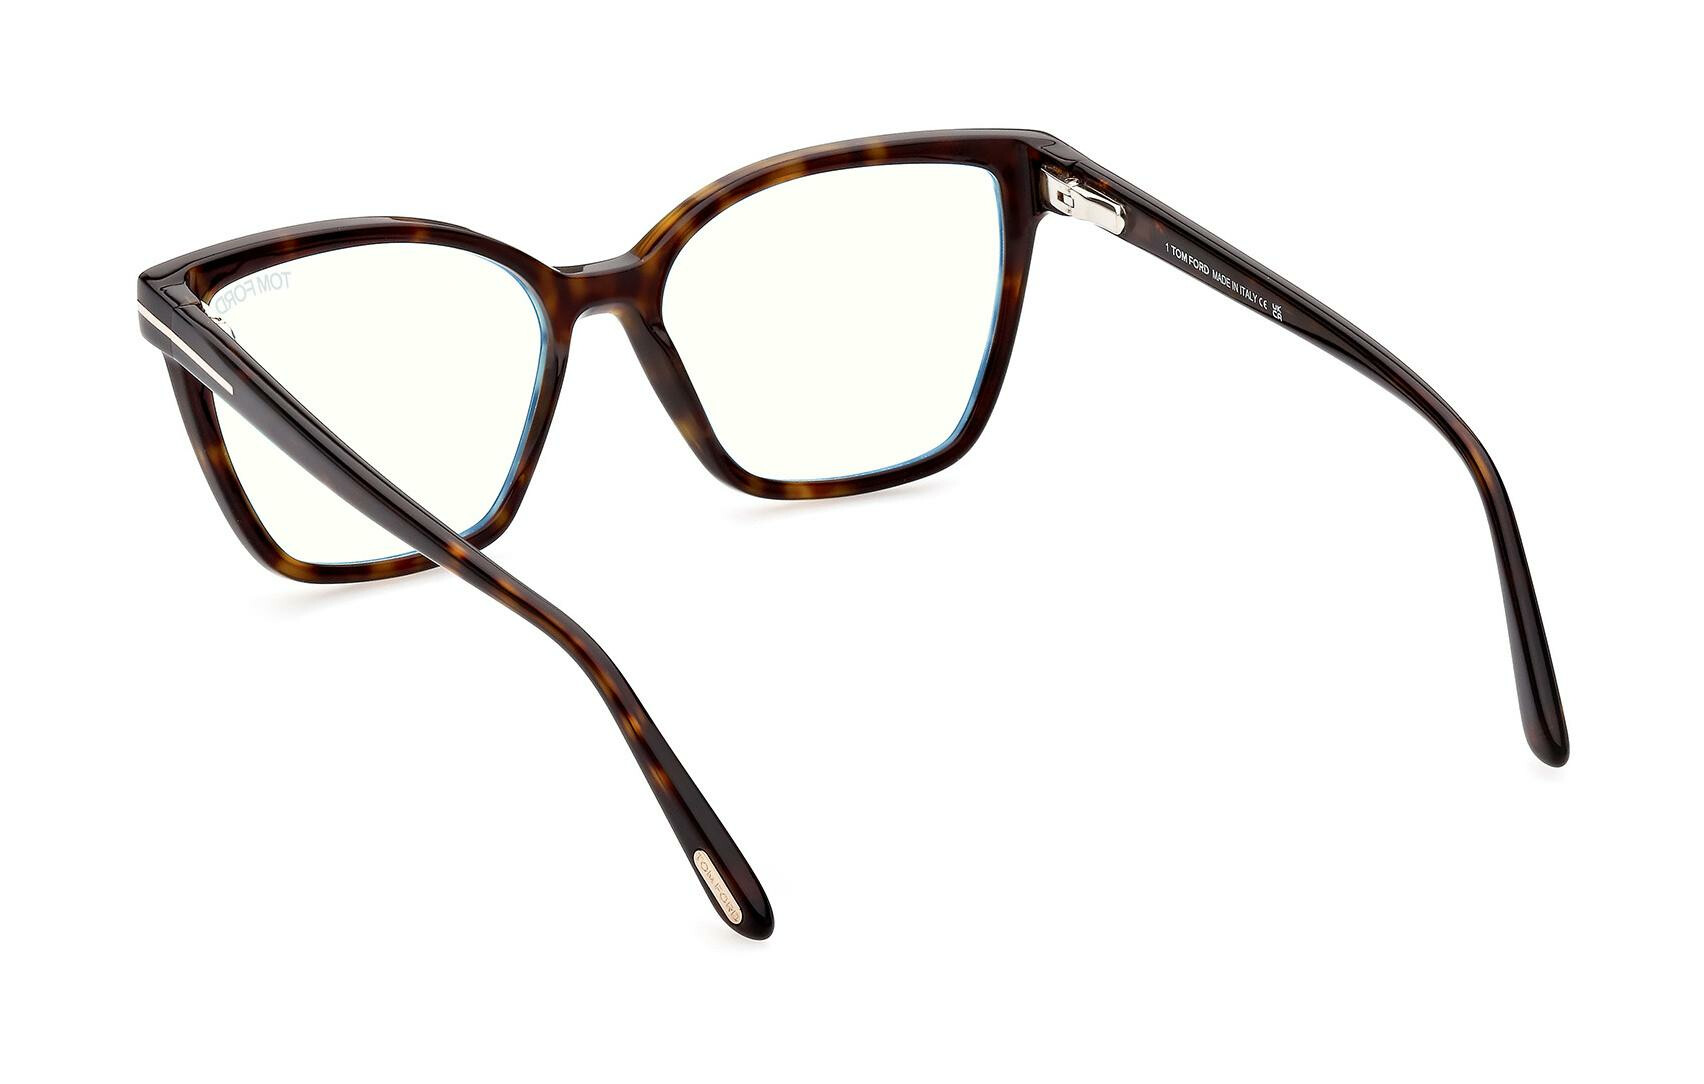 Angle_Right01 Tom Ford FT5812-B 052 Brille Havana